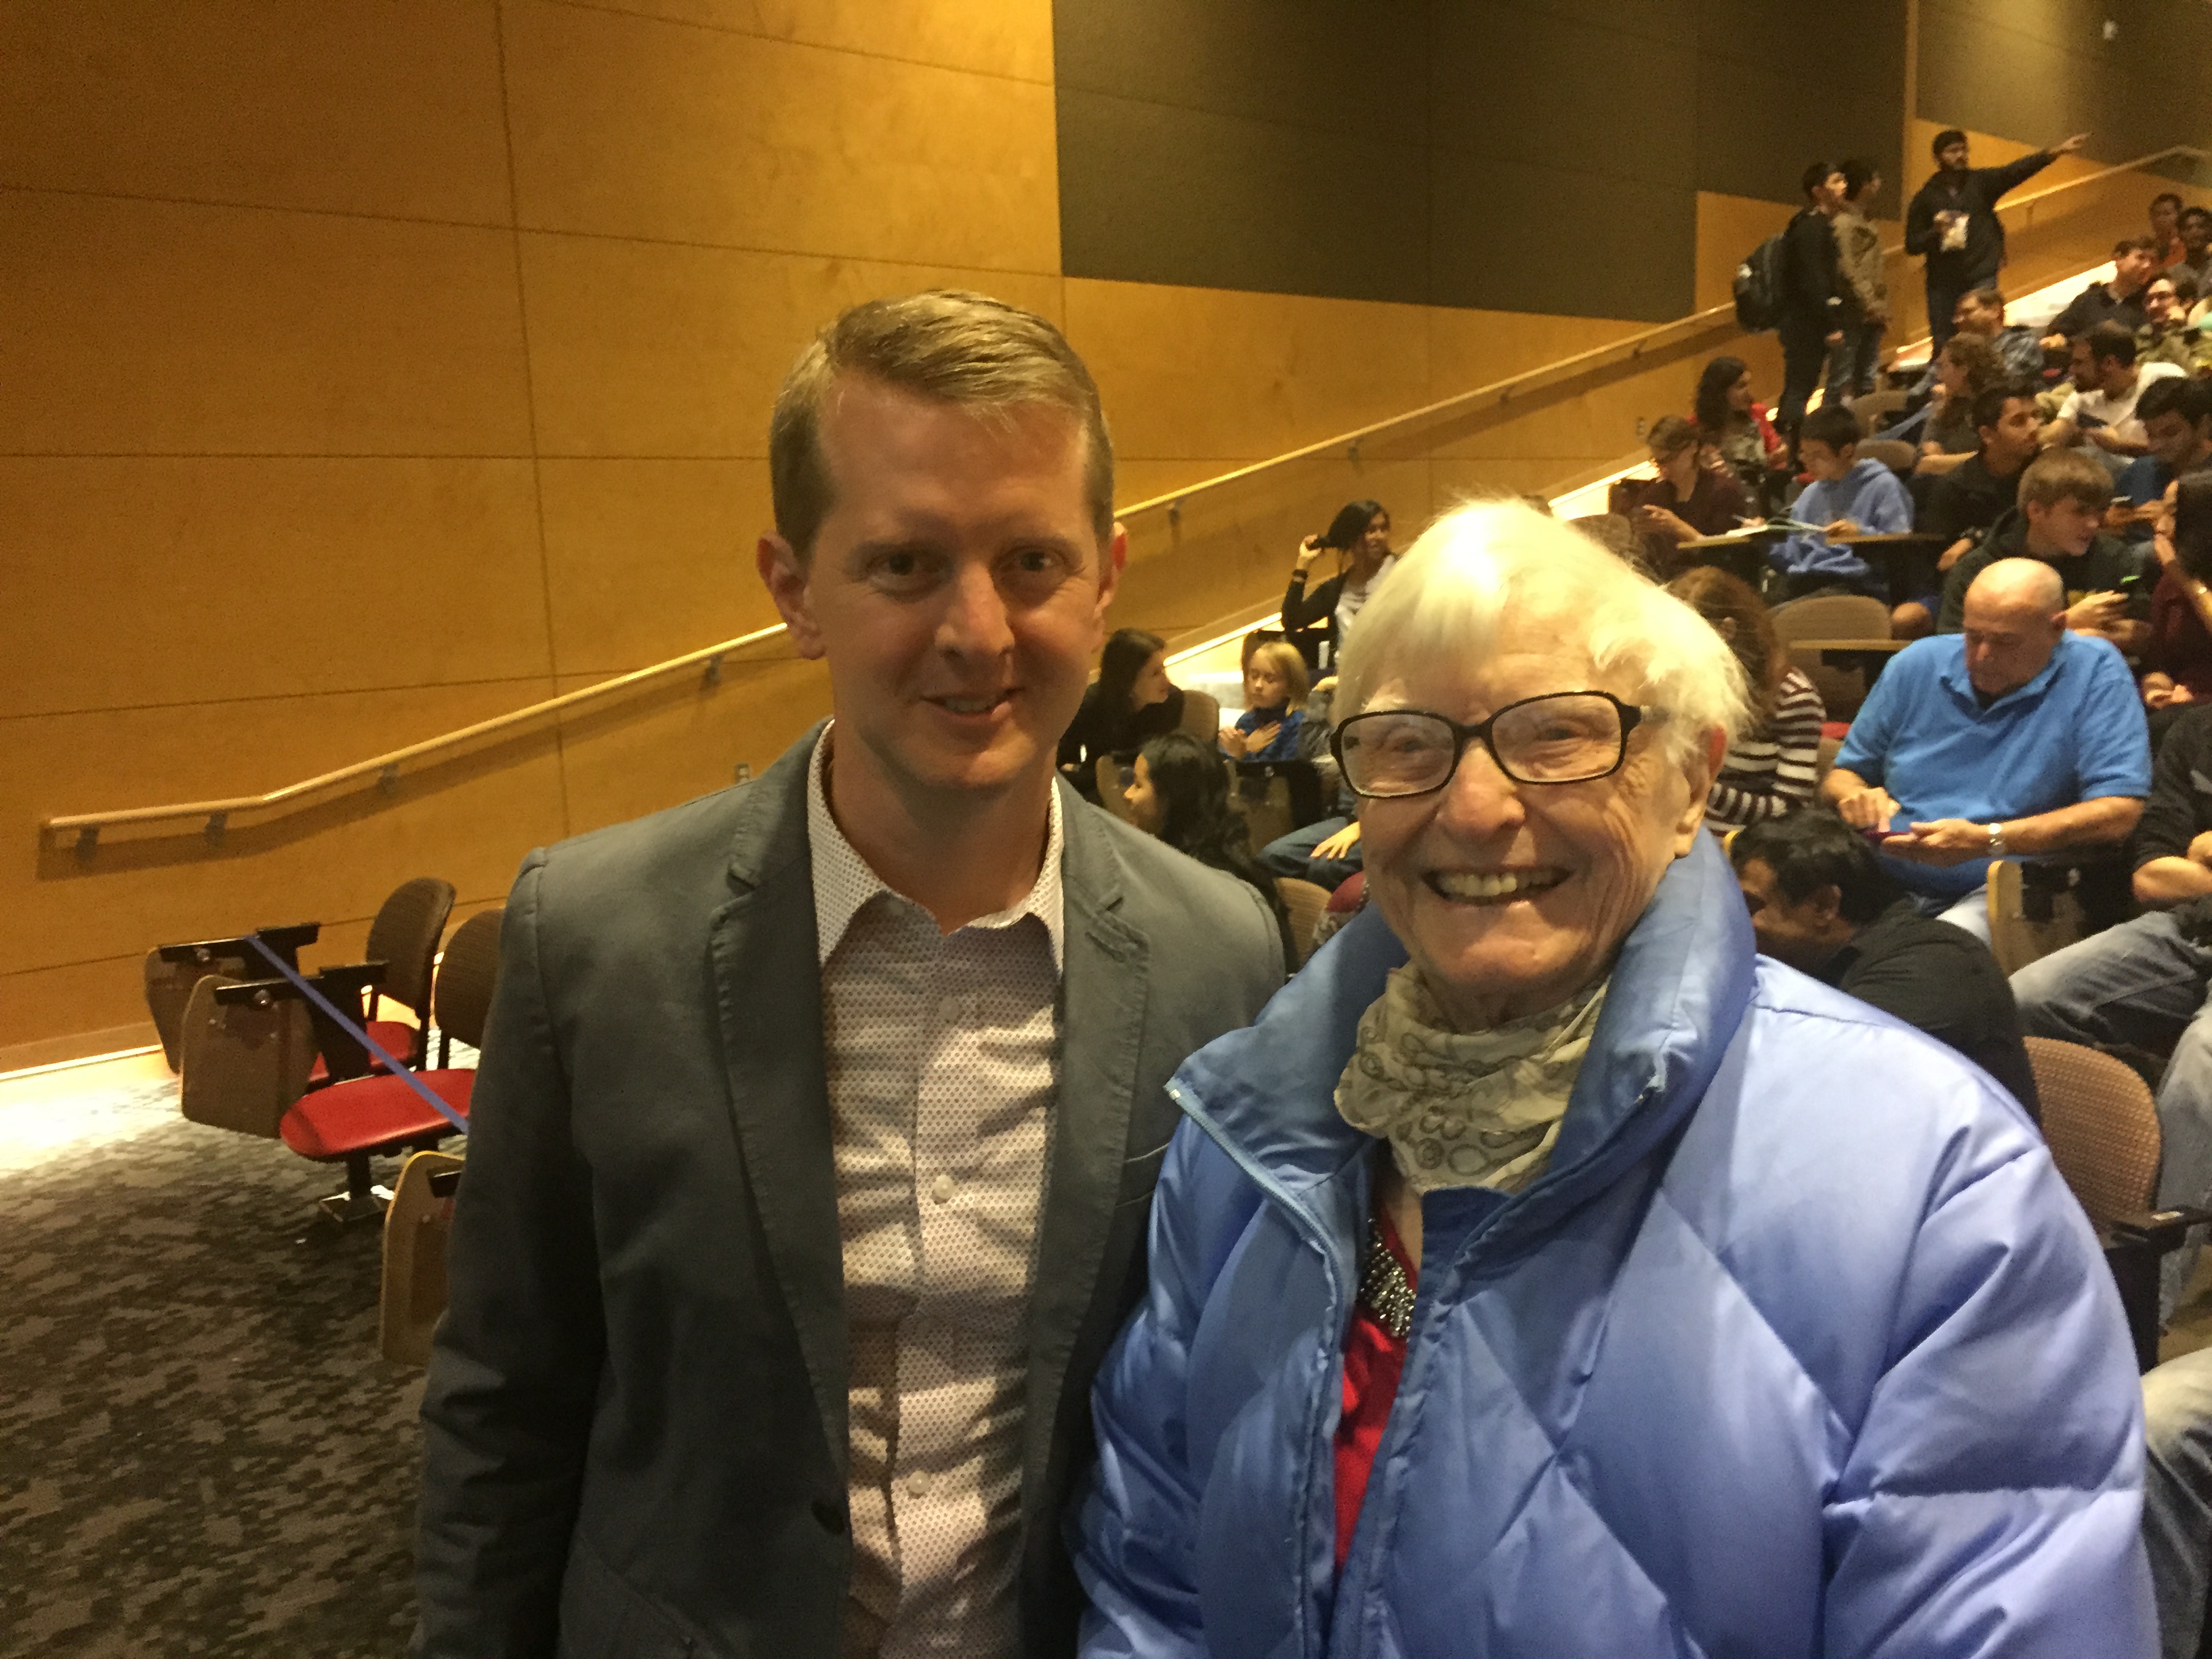 Star of Game Show Dynamos, Claire Boiko with Jeopardy Champion Ken Jennings.